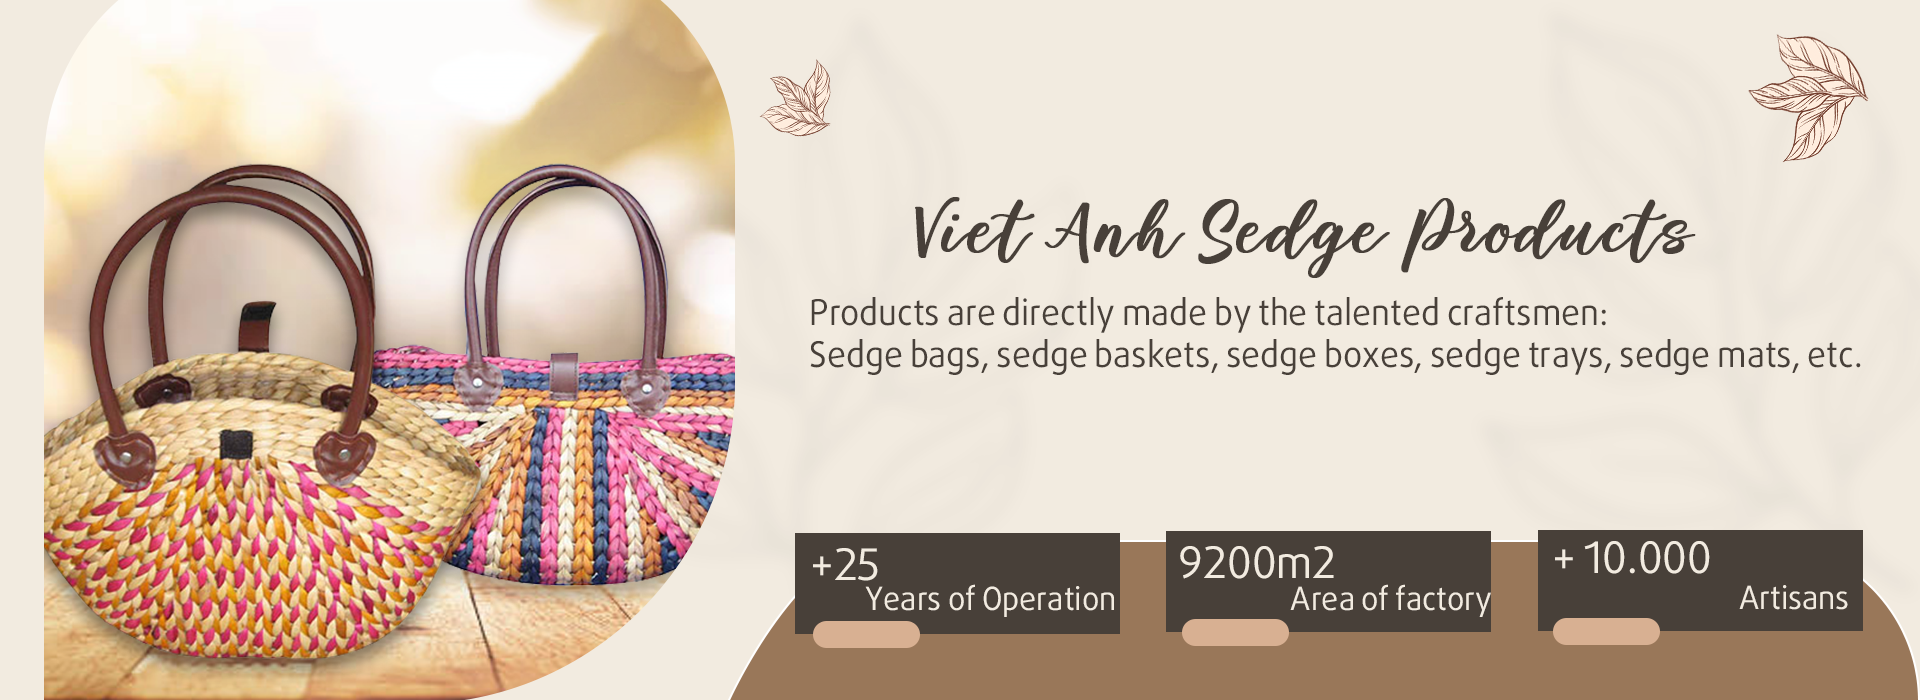 VIET ANH SEDGE PRODUCTION EXPORT JOINT STOCK COMPANY